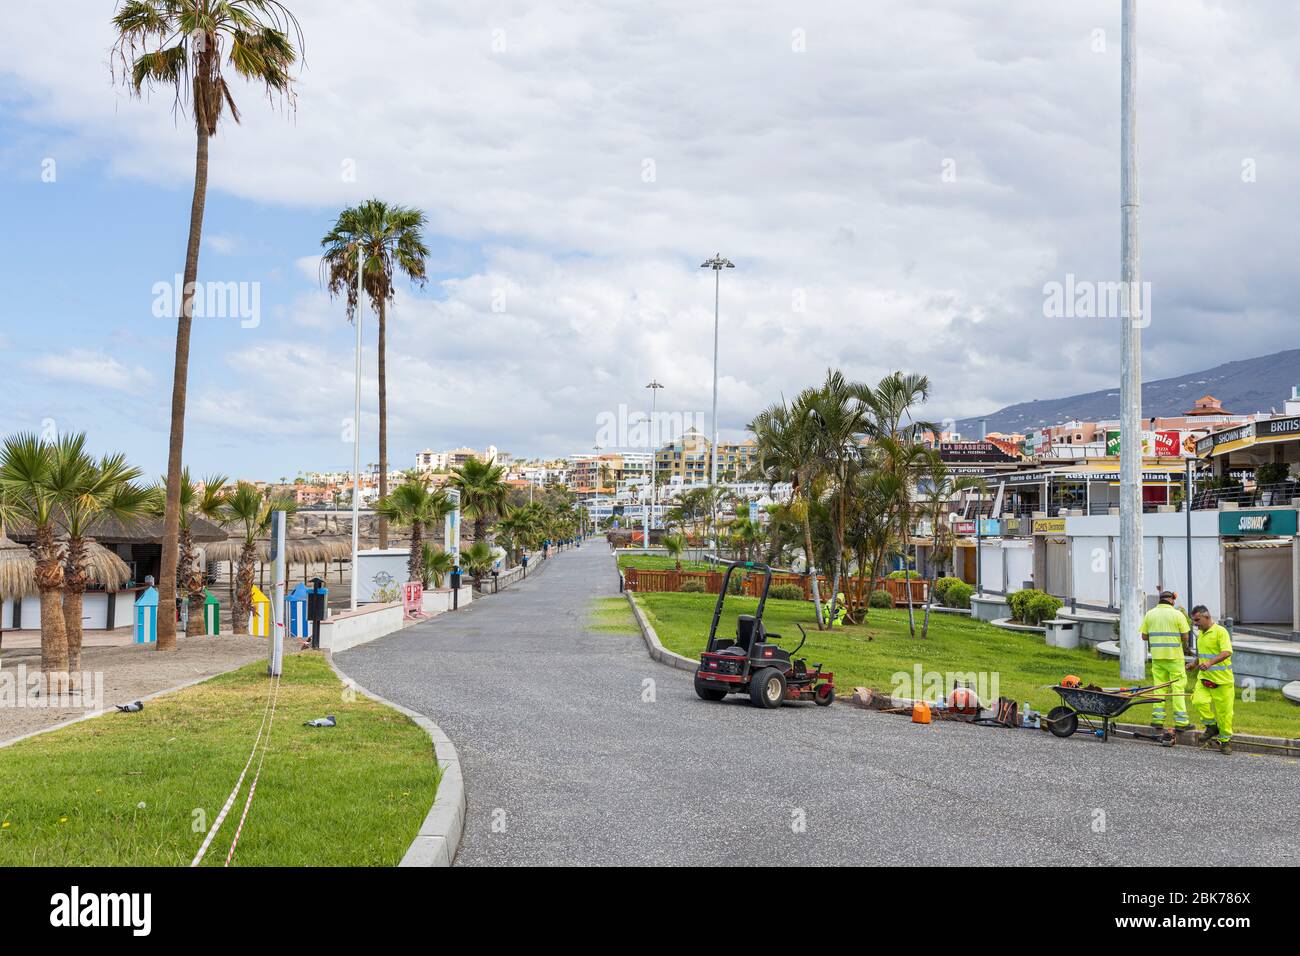 Gardeners continue maintaining the grass and plants along the promenade at Fanabe during the covid 19 lockdown in the tourist resort area of Costa Ade Stock Photo